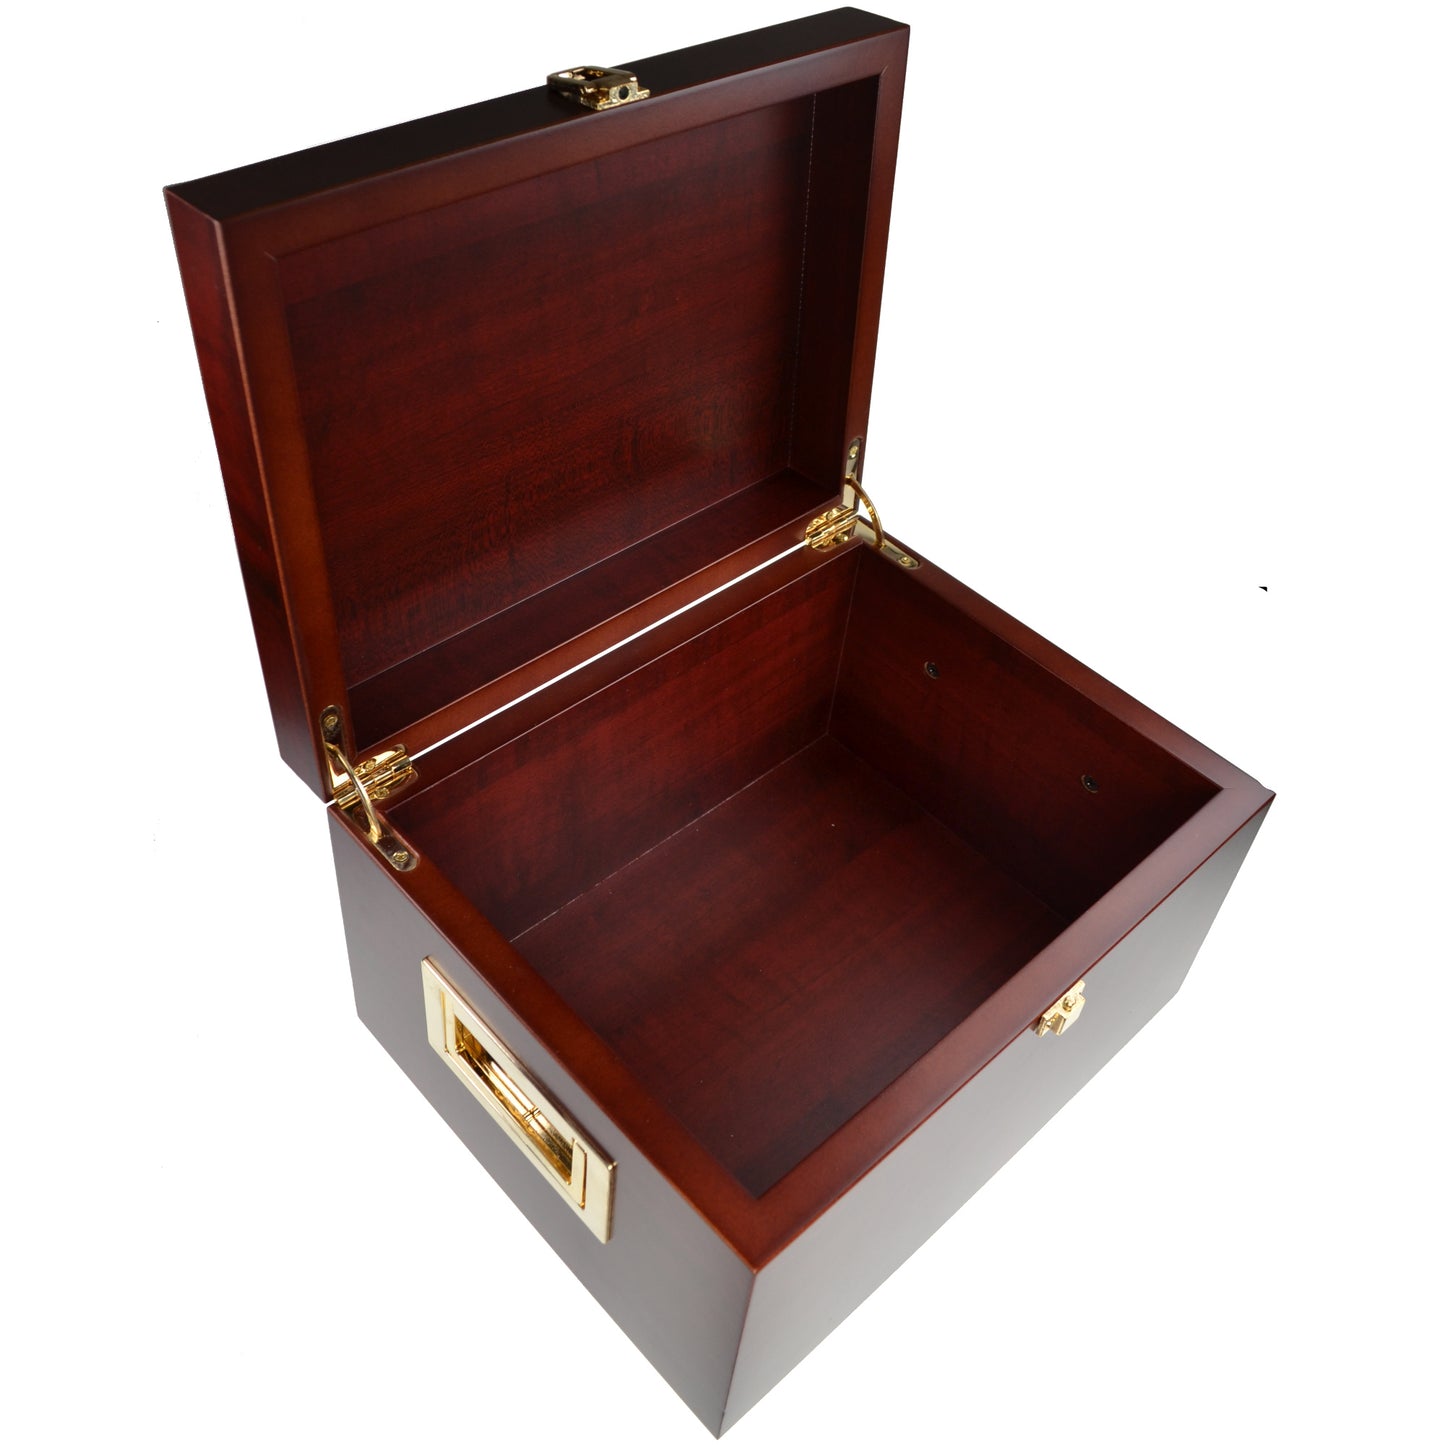 Valet box in Cherry with contents